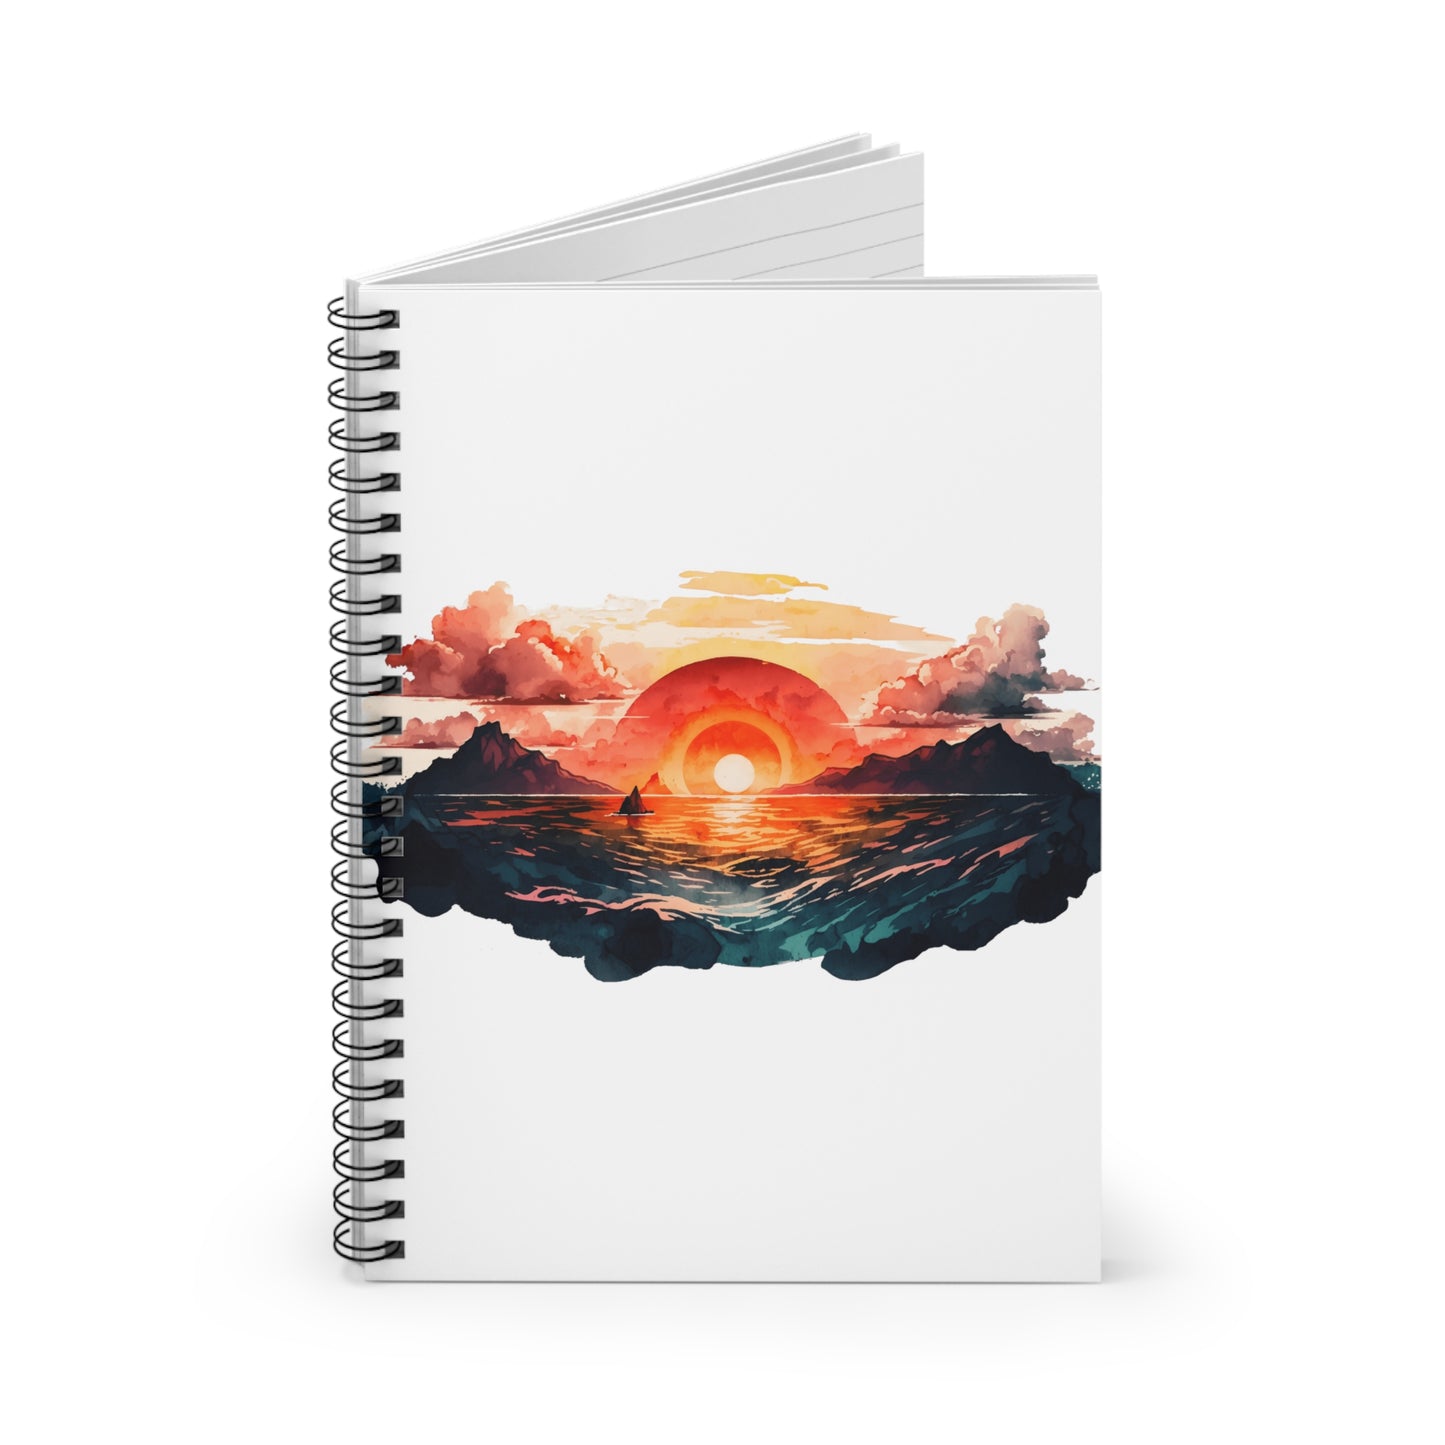 Sunrise Sunset at the Beach: Spiral Notebook - Log Books - Journals - Diaries - and More Custom Printed by TheGlassyLass.com